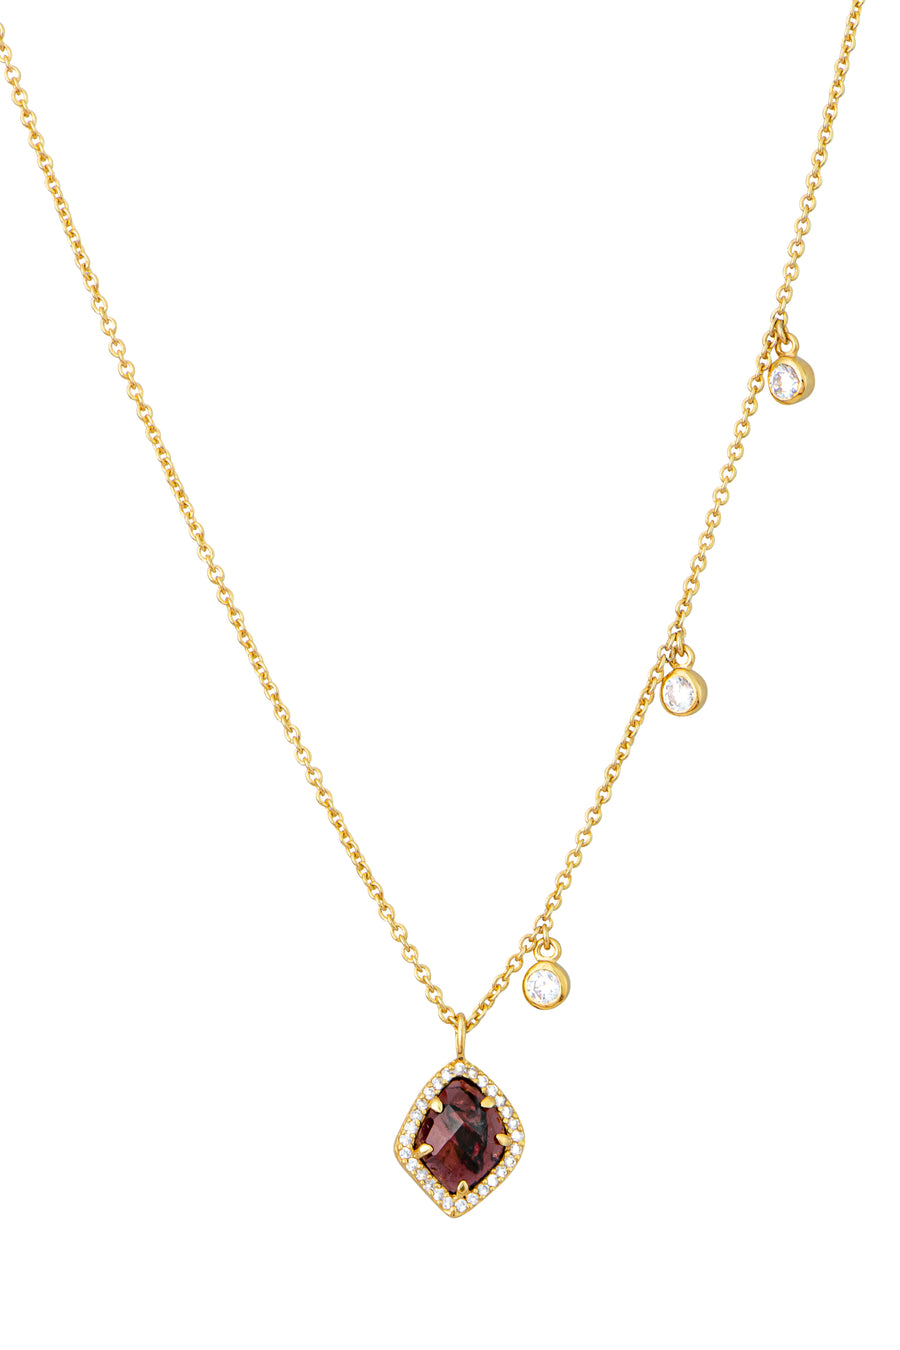 16k Gold Plate Garnet and CZ Necklace (812685)